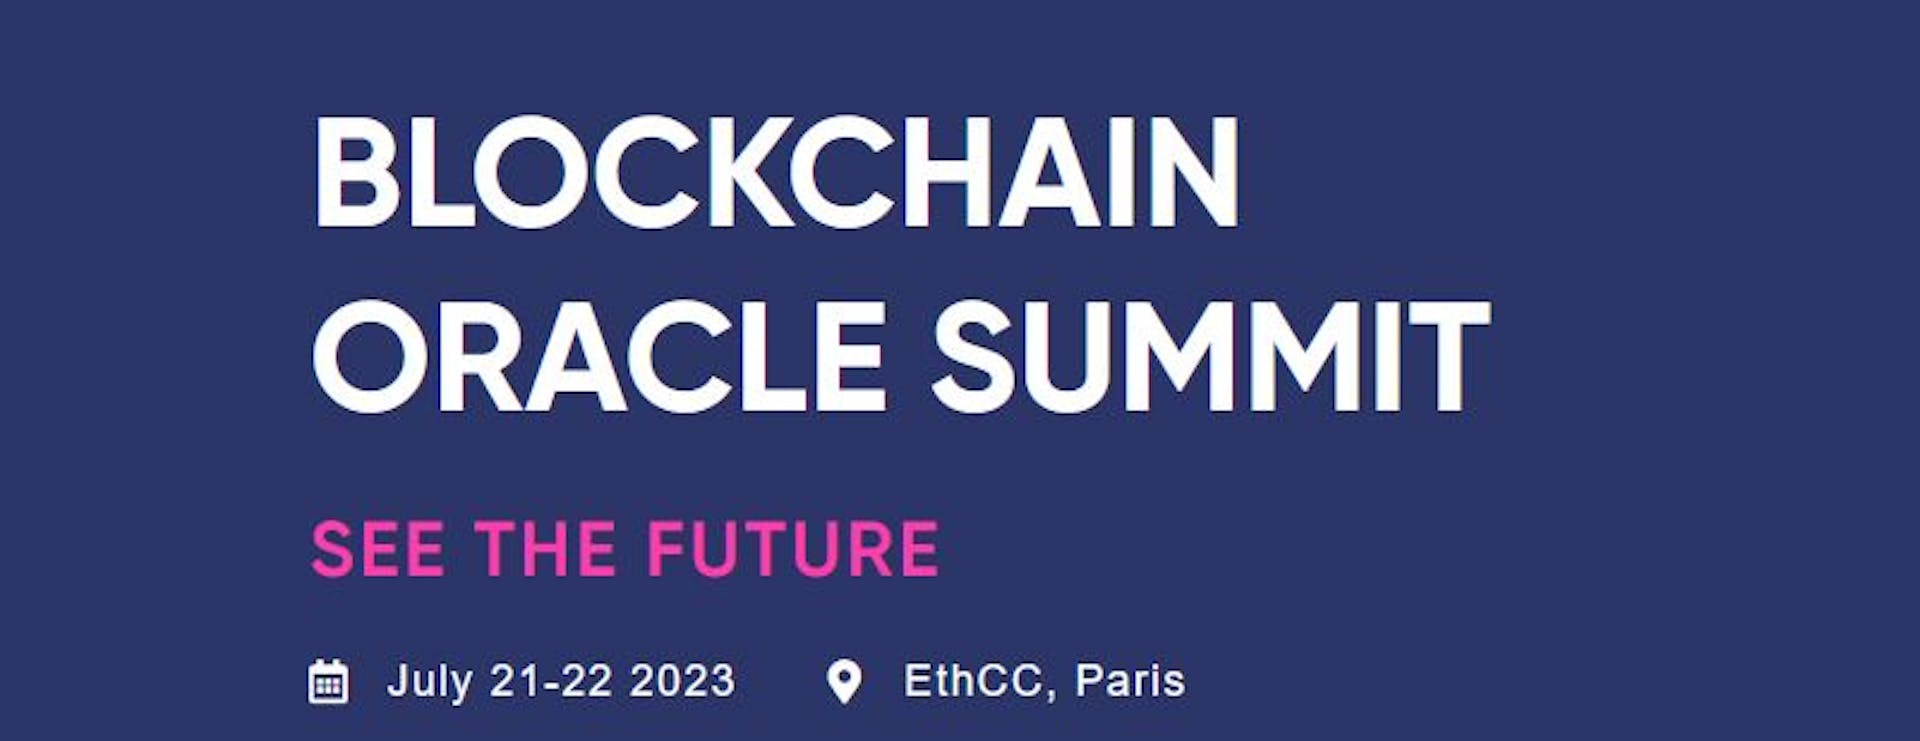 featured image - Blockchain Oracle Innovations y Blockchain Oracle Summit 2023 (Parte 2)